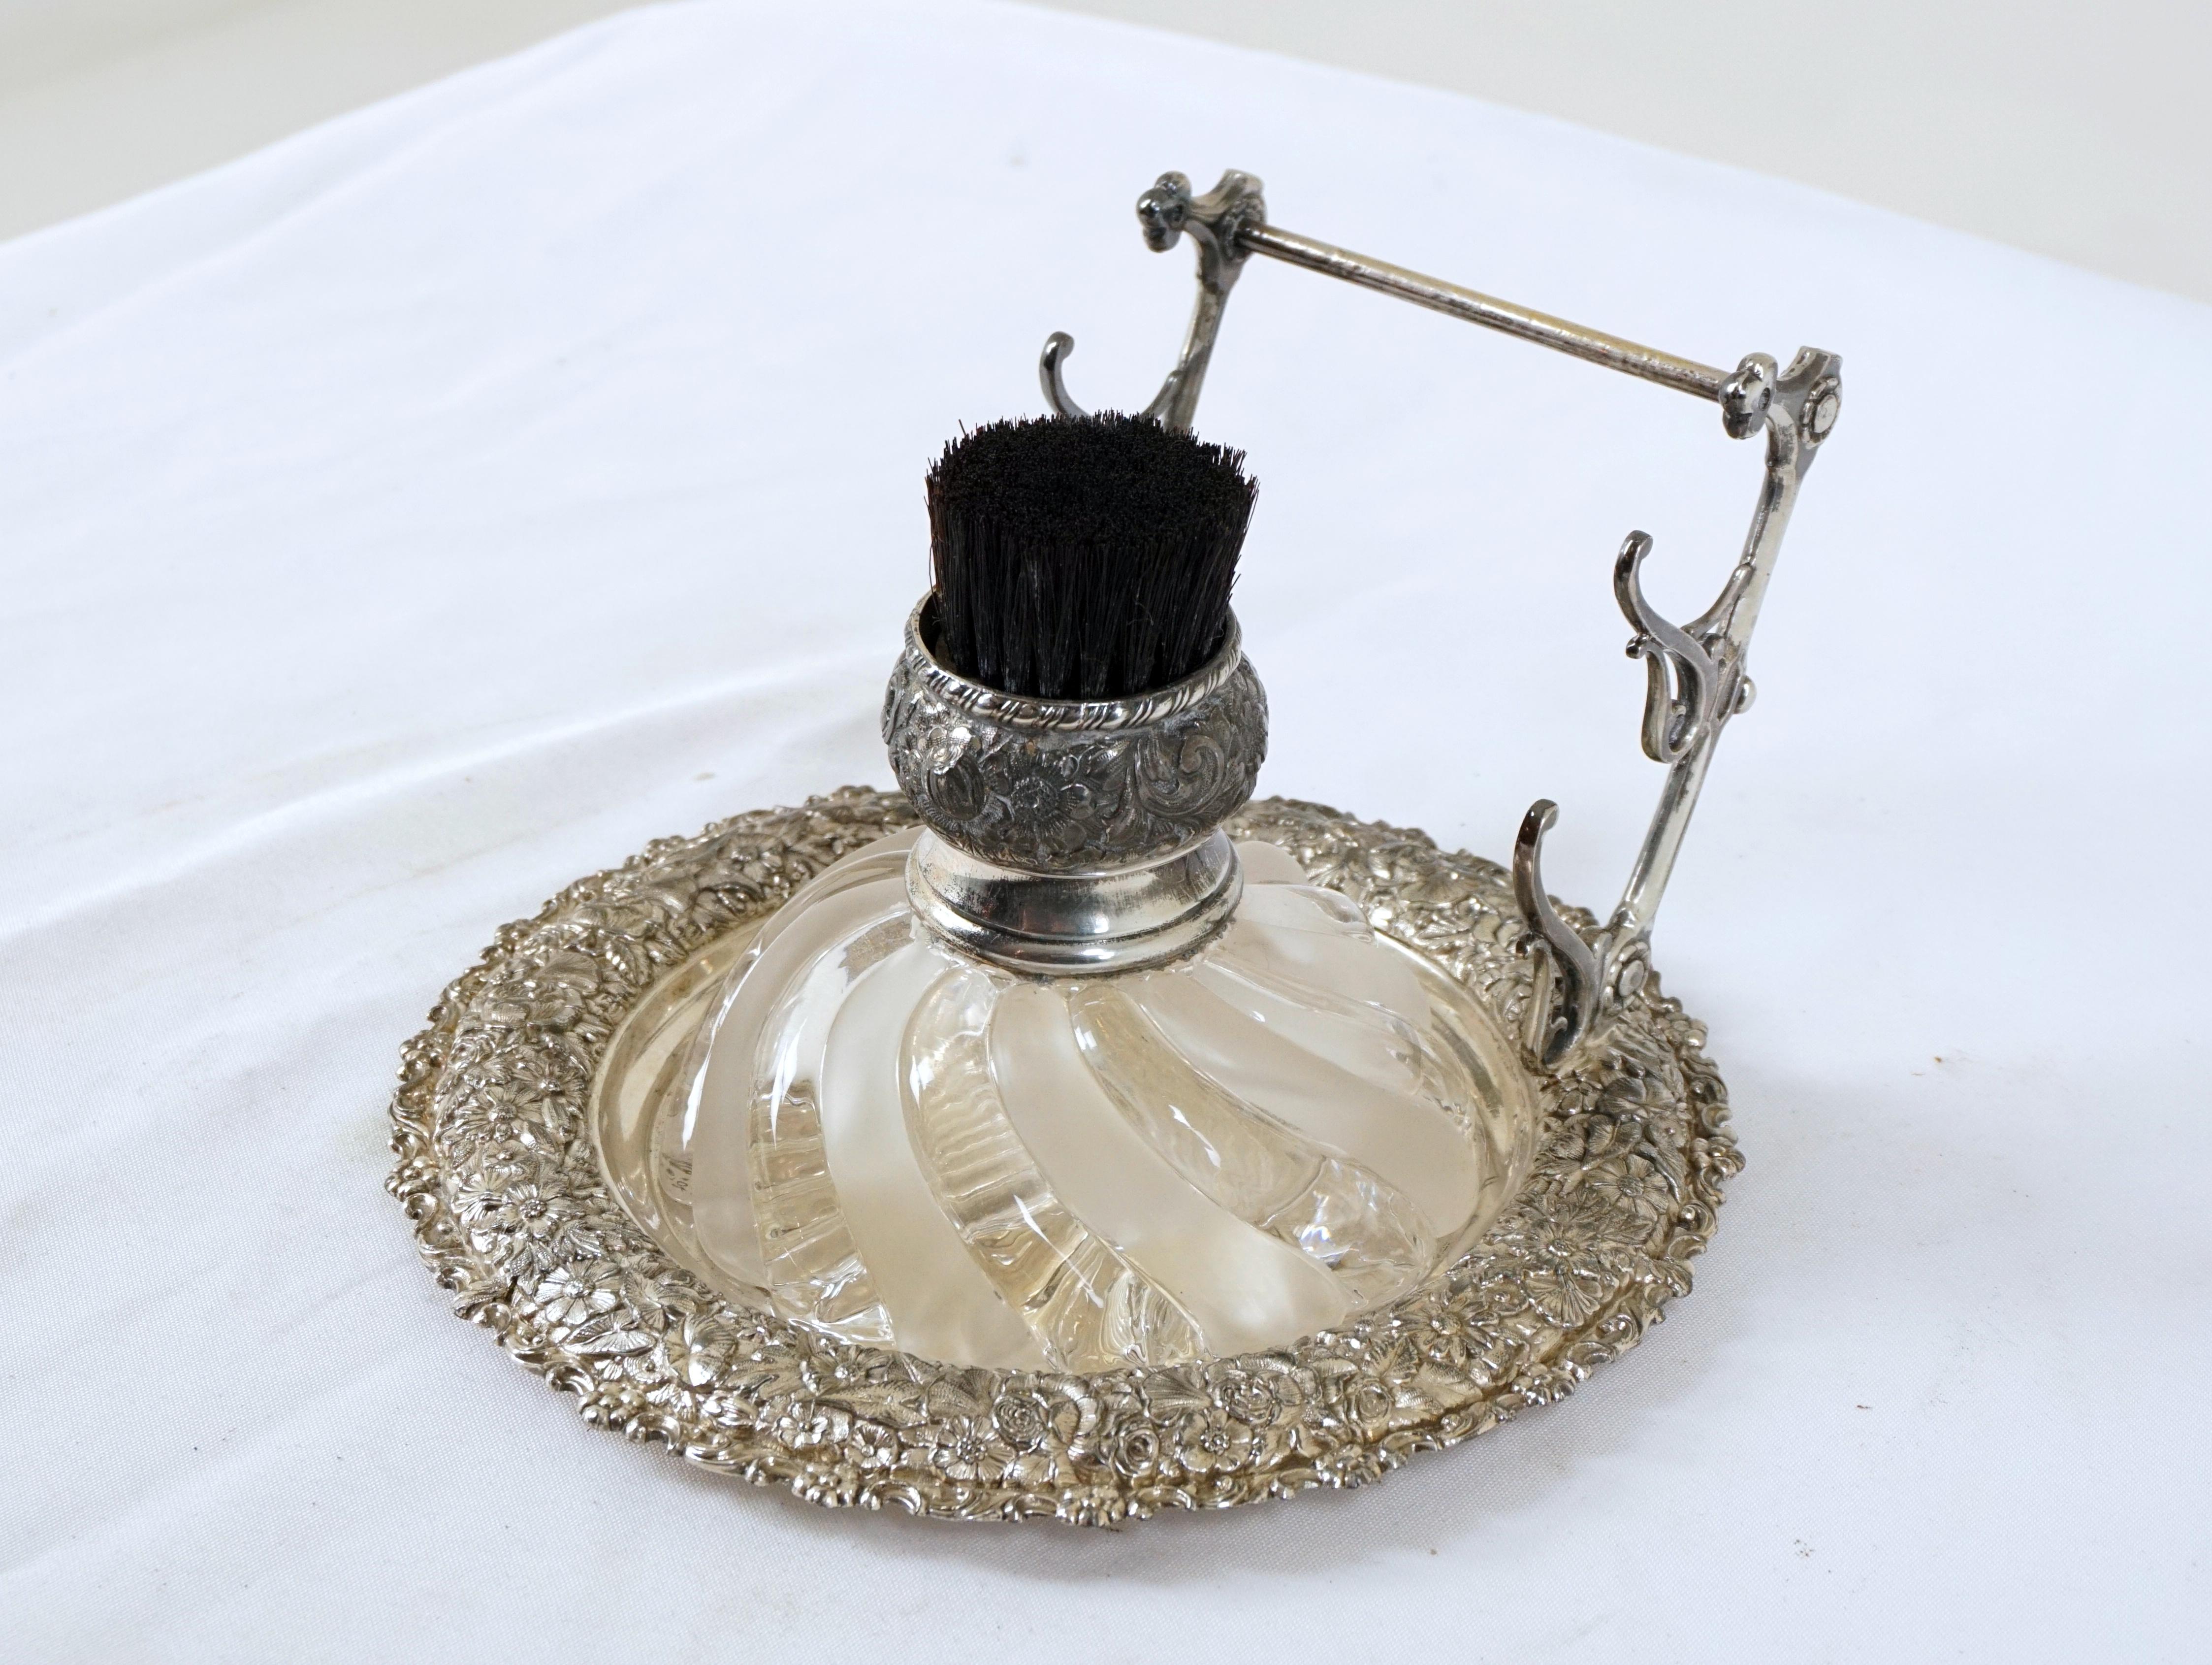 Antique circular silver plated inkwell, Simpson Hall Miller Co, Scotland 1910, H551

Scotland 1910
Silver plate and glass
Shaped pen rest to the back
Embossed lid with brush top 
Shaped inkwell with chipped liner
Sitting in circular base with